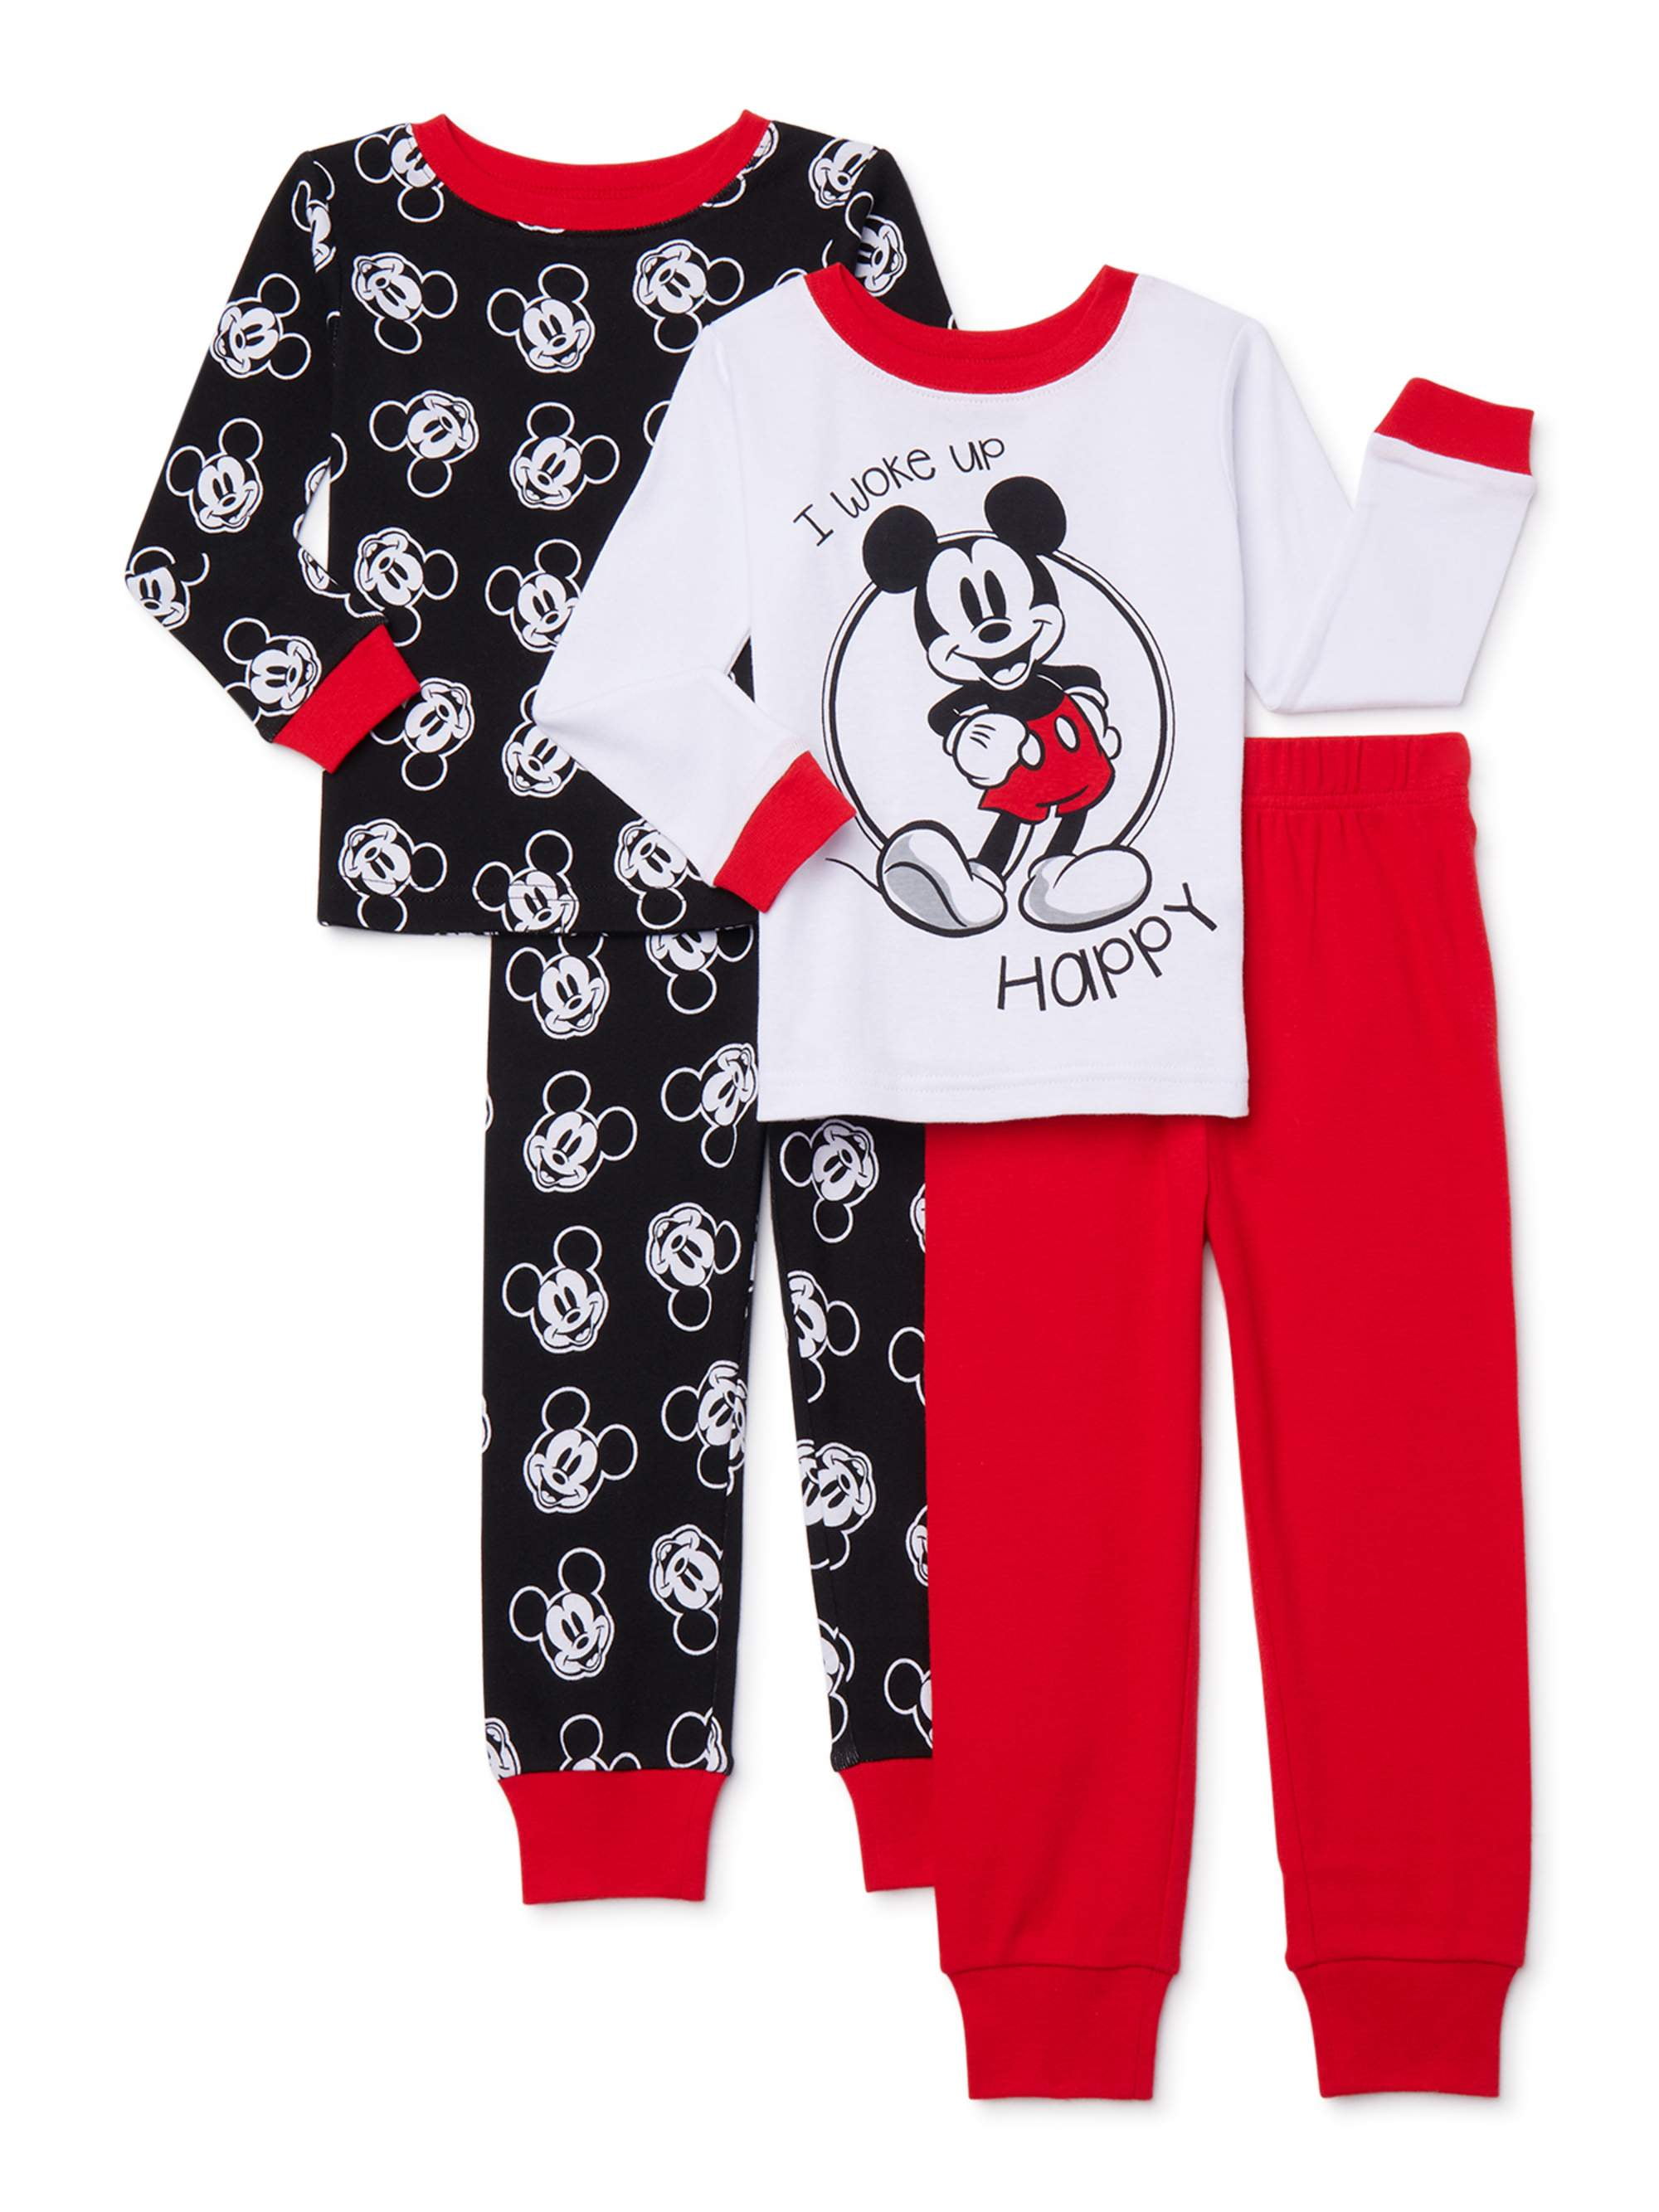 Mickey Mouse Toddler Boys Multi-Color 4pc Snug Fit Pajama Set Size 2T 3T 4T $42 